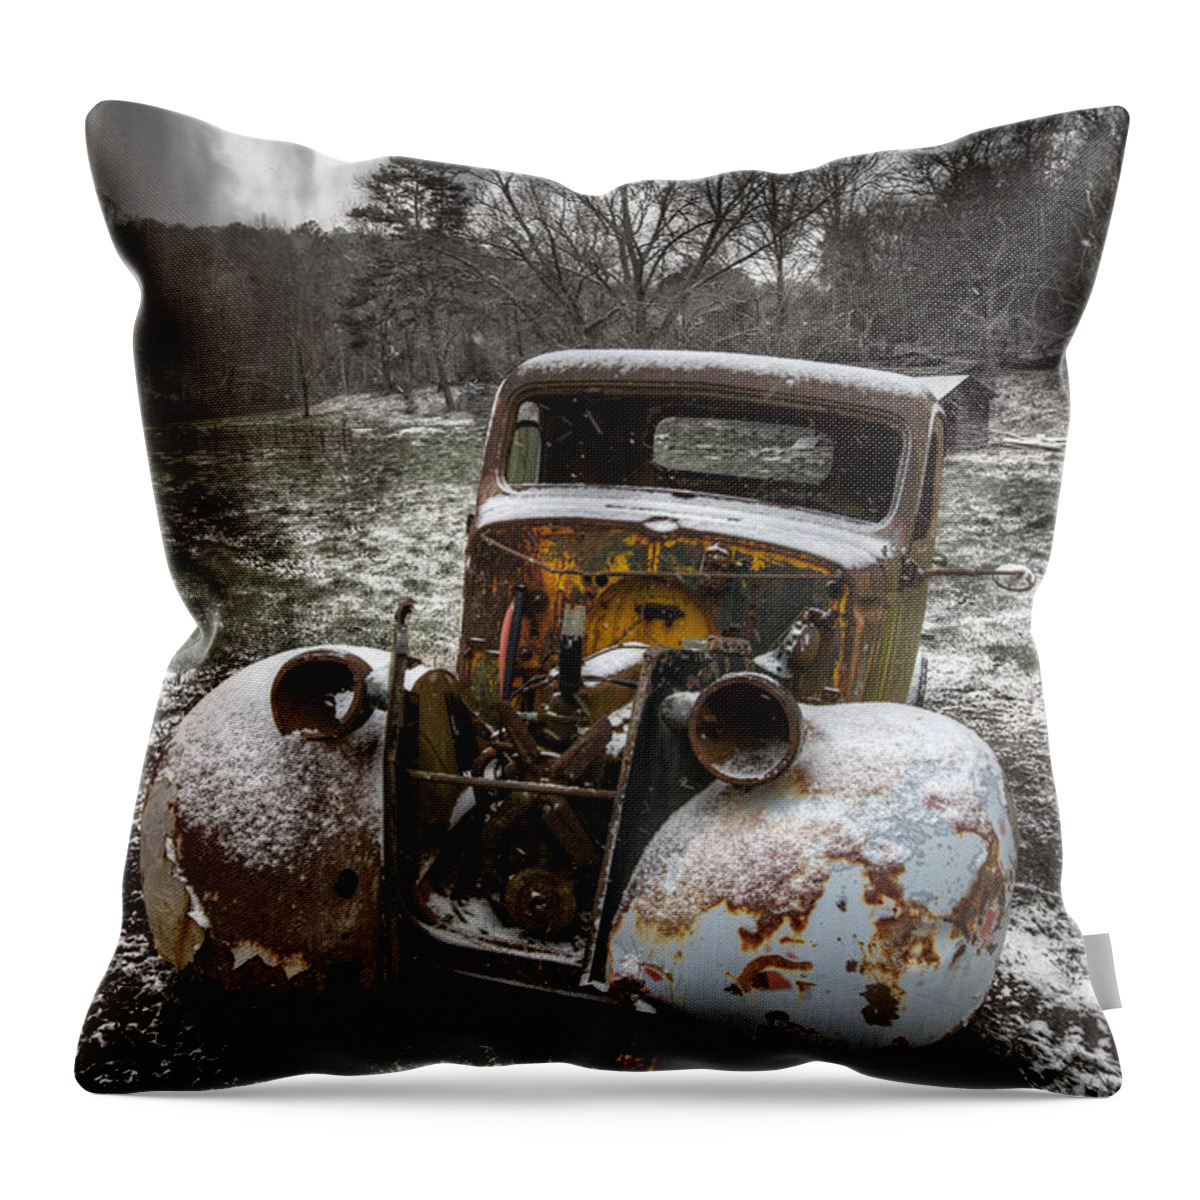 In Throw Pillow featuring the photograph Old Truck in the Smokies by Debra and Dave Vanderlaan